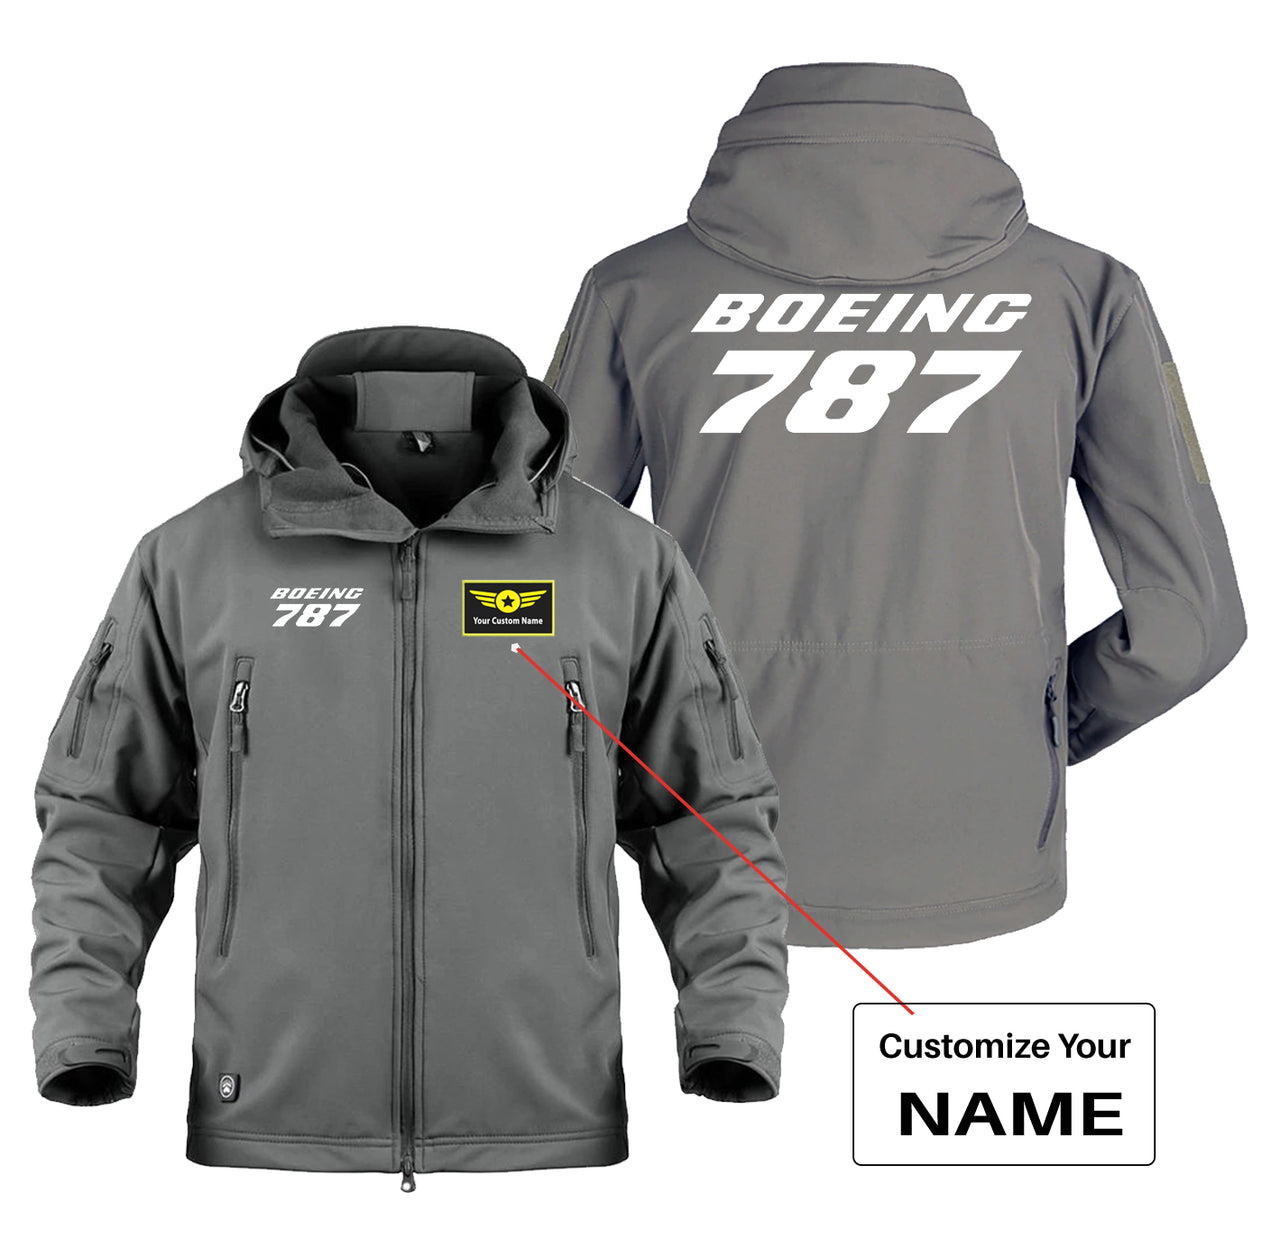 Boeing 787 & Text Designed Military Jackets (Customizable)